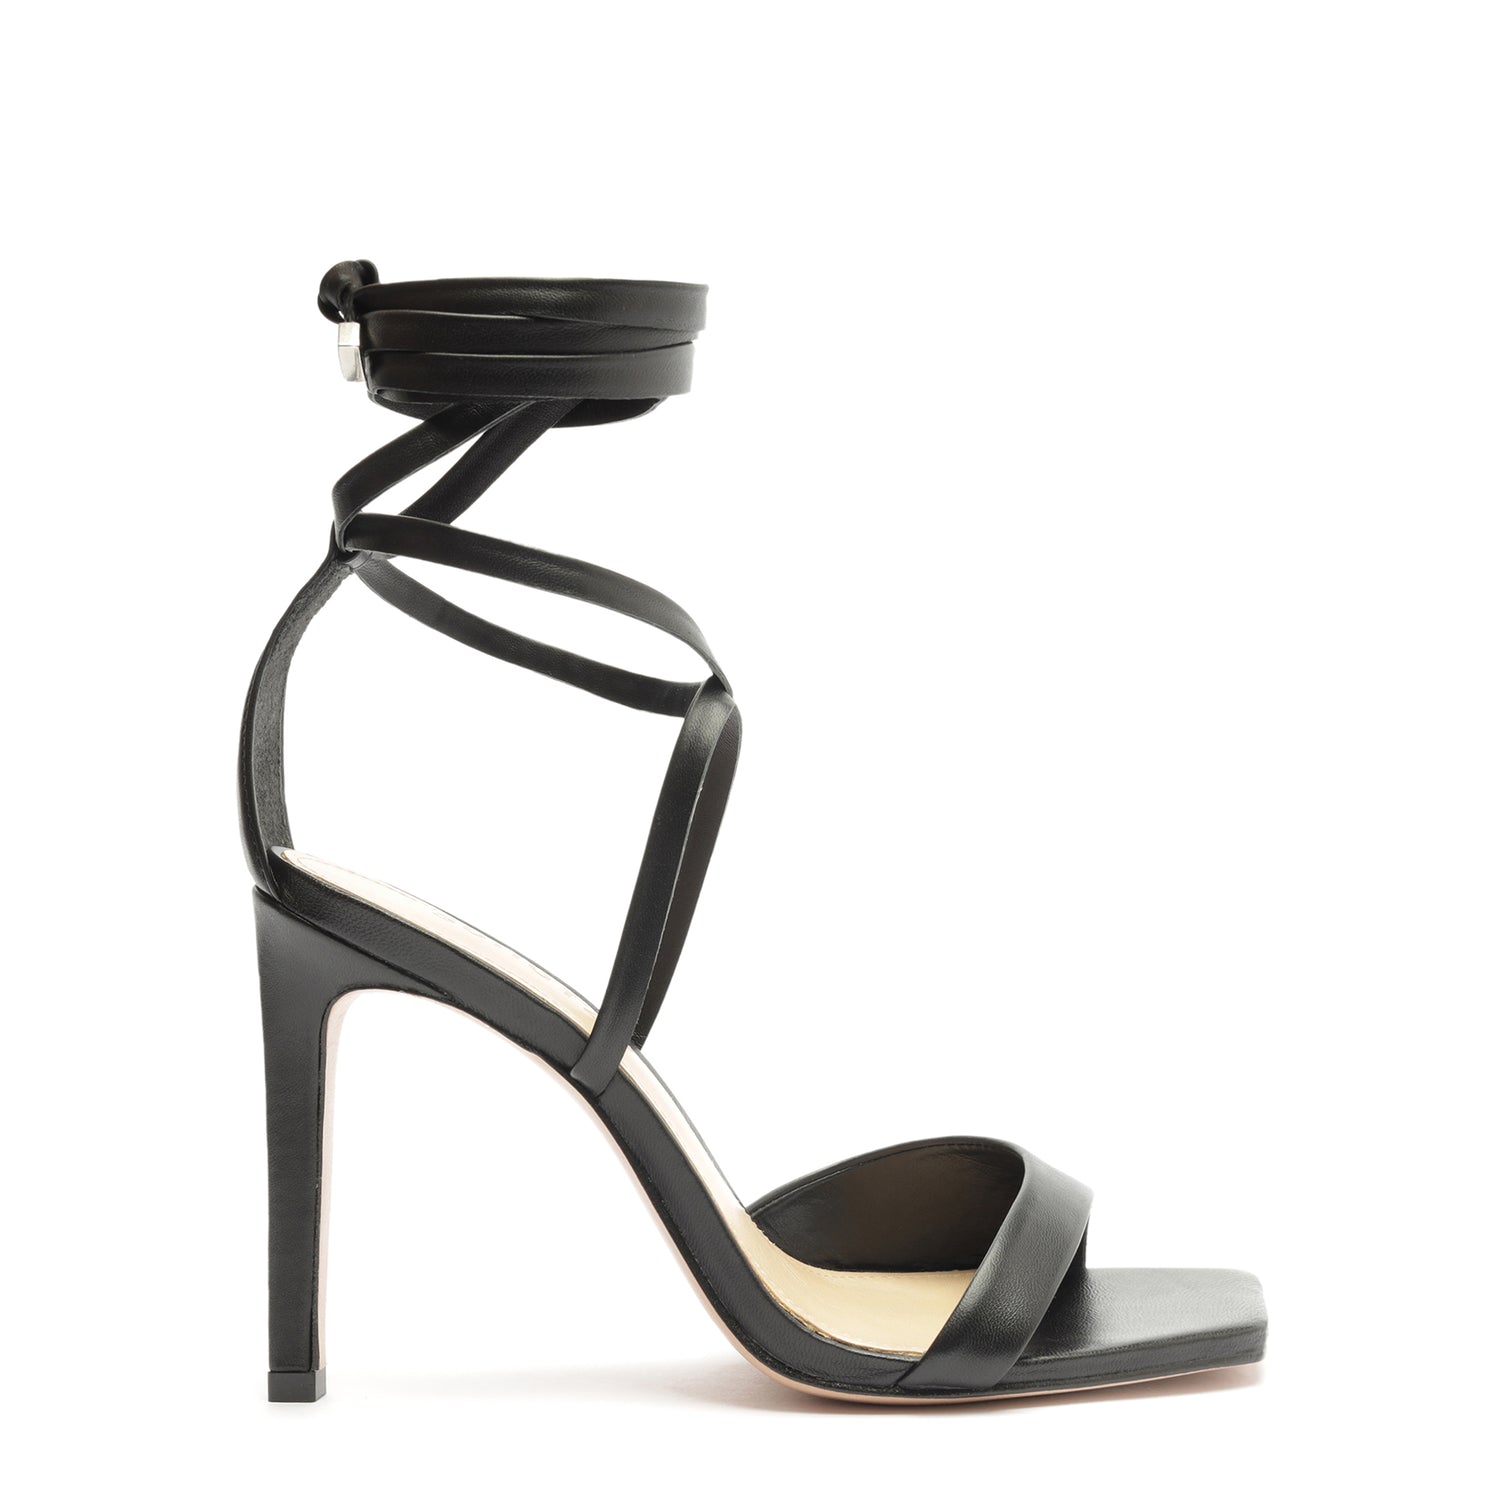 Bryce Nappa Leather Sandal Sandals Open Stock 5 Black Nappa Leather - Schutz Shoes